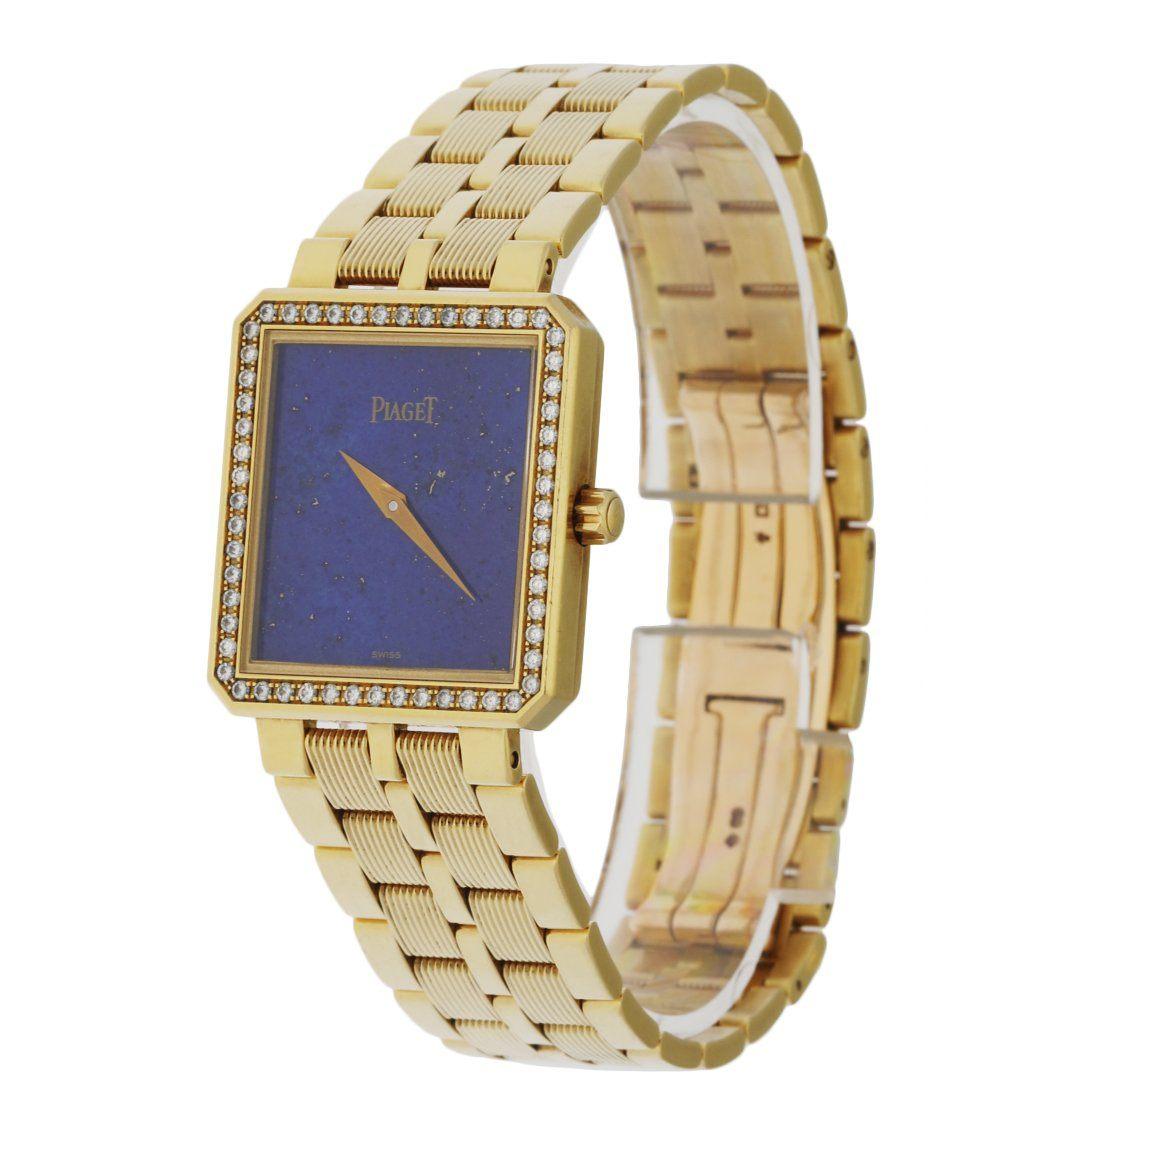 Piaget 50155 M601DÂ Ladie watch. 25MM 18K yellow gold case with 18K yellow gold and factory diamond set bezel. Blue lapis dial with gold hands. 18K yellow gold bracelet with 18K yellow gold hidden butterfly clasp. Will fit up to 7-Inch wrist.